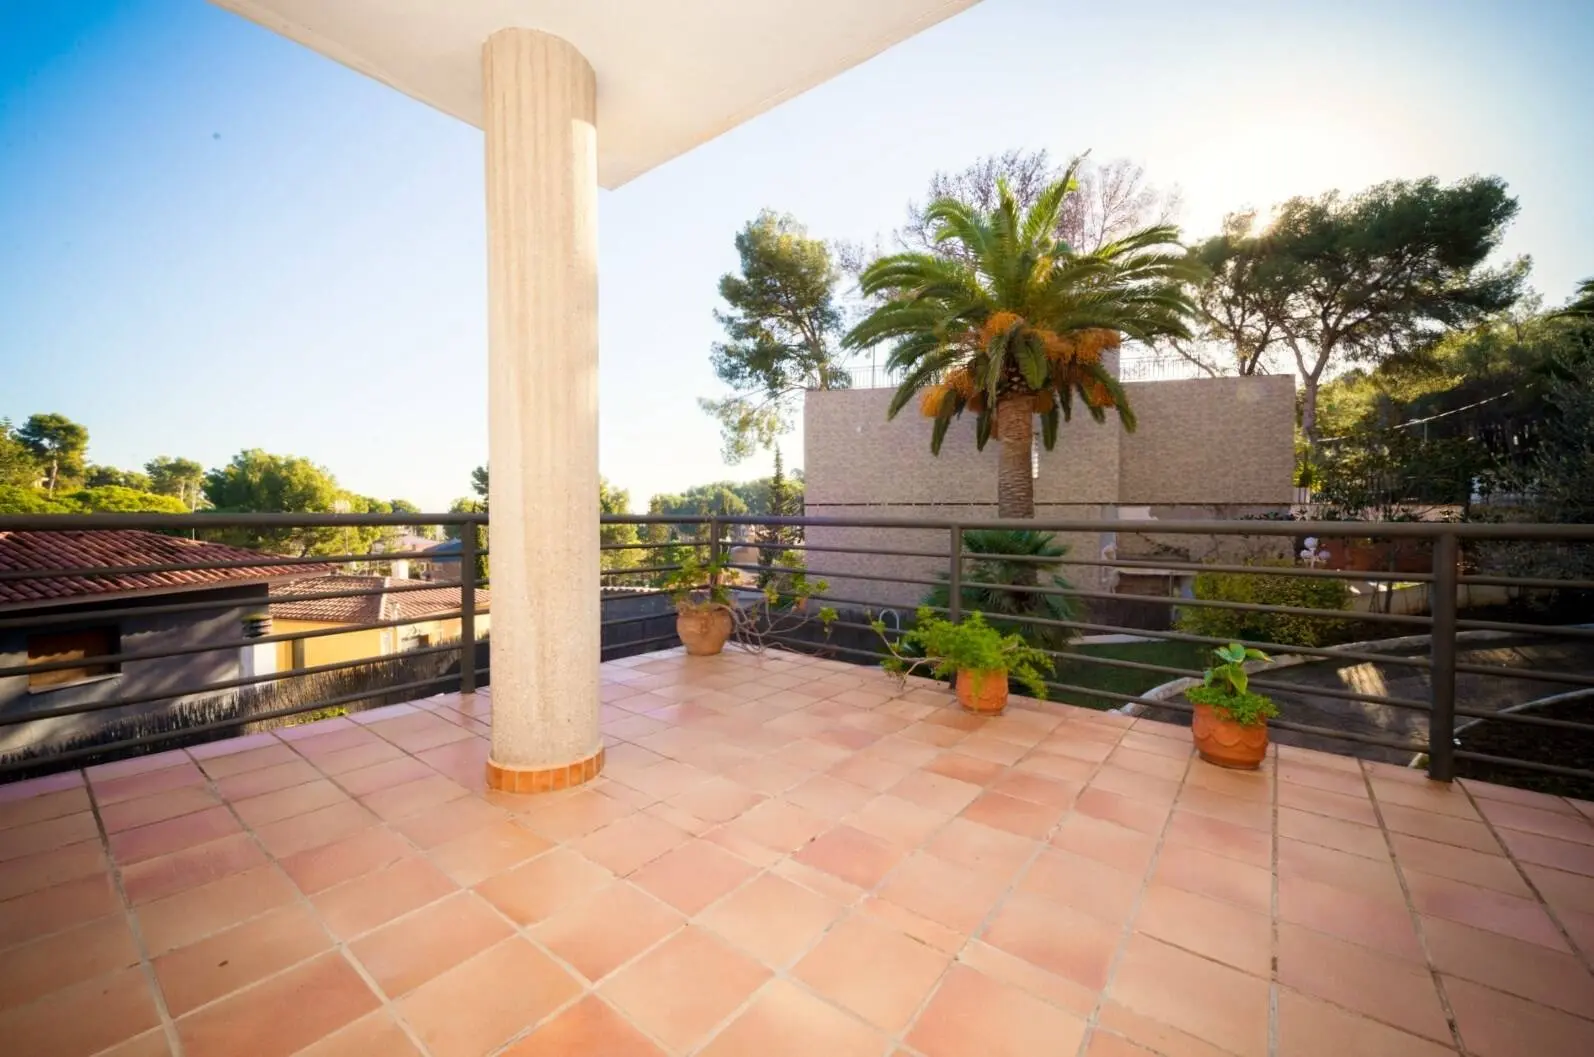 House for sale with a swimming pool in Castelldefels, Barcelona. 24